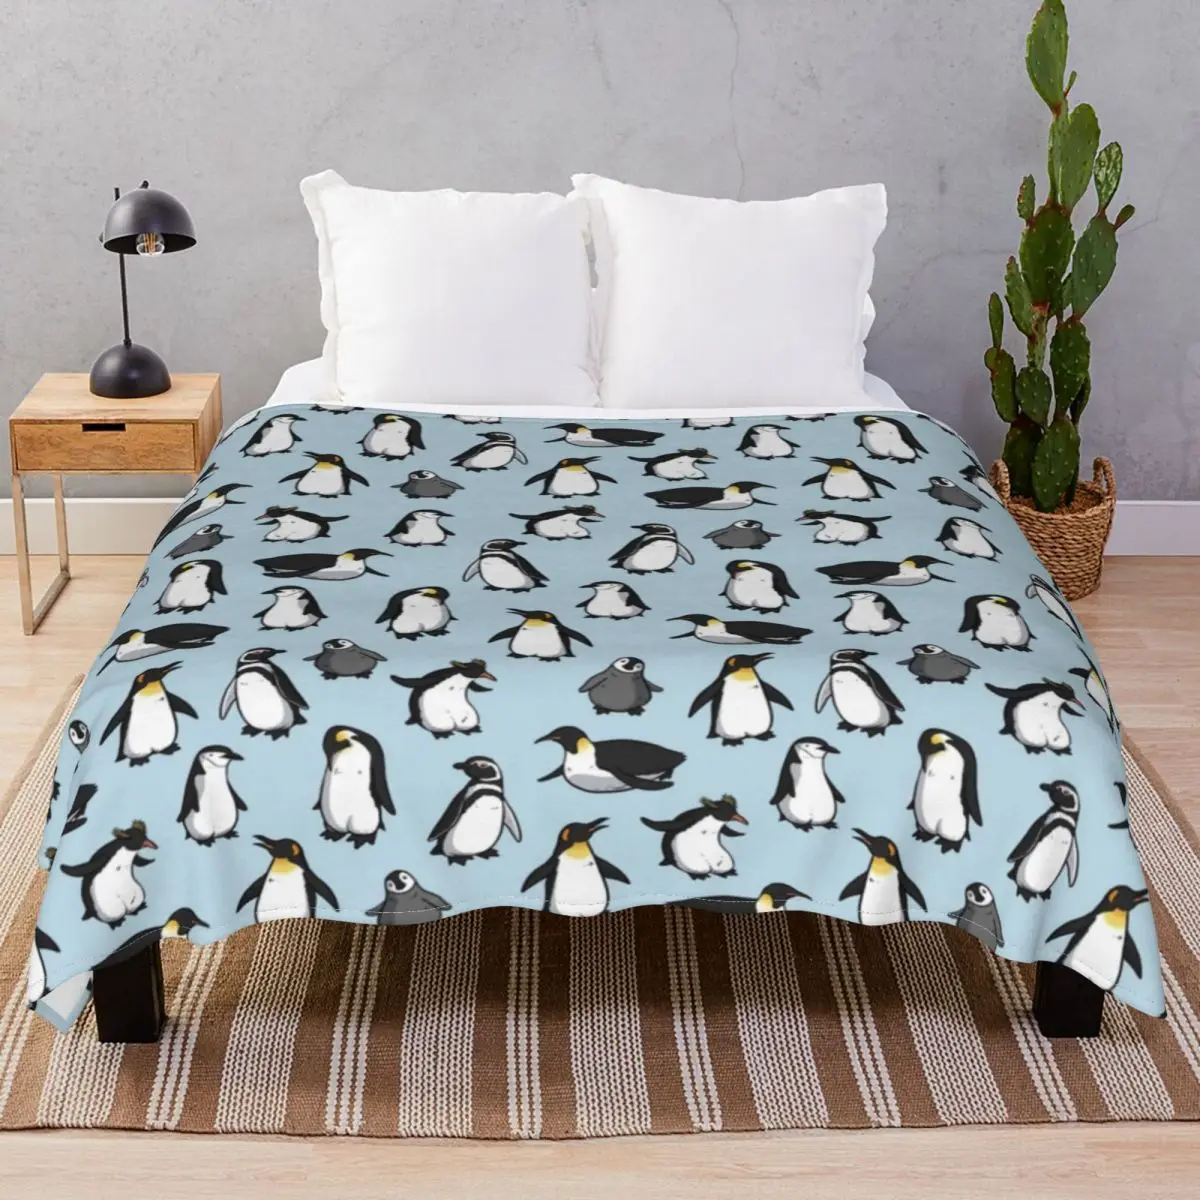 

Cute Penguin Pattern Blankets Flannel Print Soft Throw Blanket for Bedding Home Couch Camp Cinema